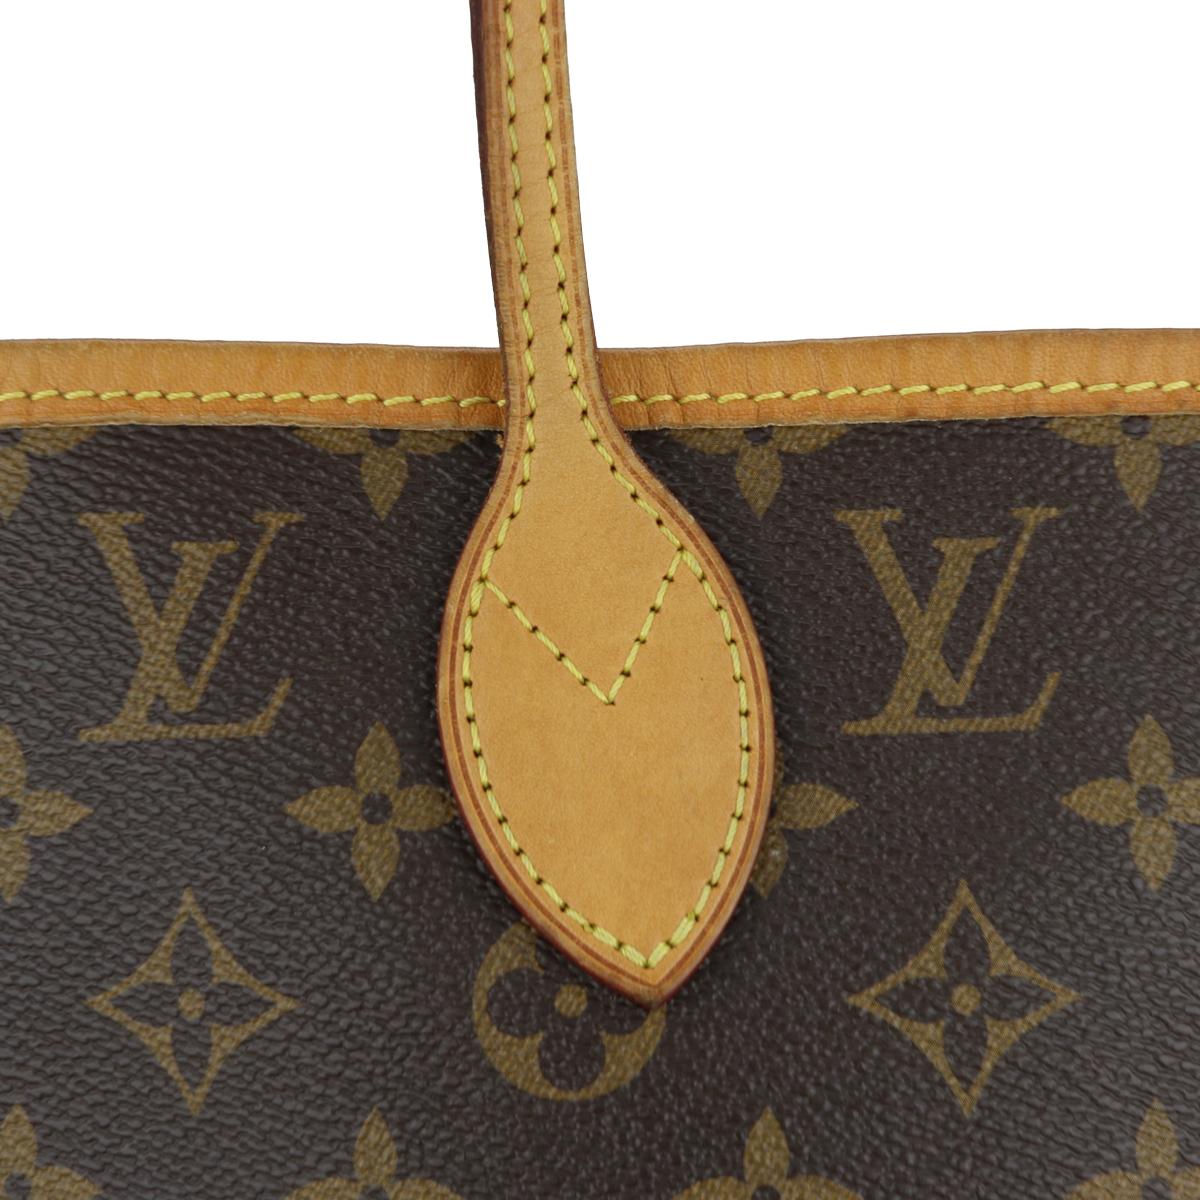 Louis Vuitton Neverfull MM Bag in Monogram with Beige Interior 2017 For Sale 7